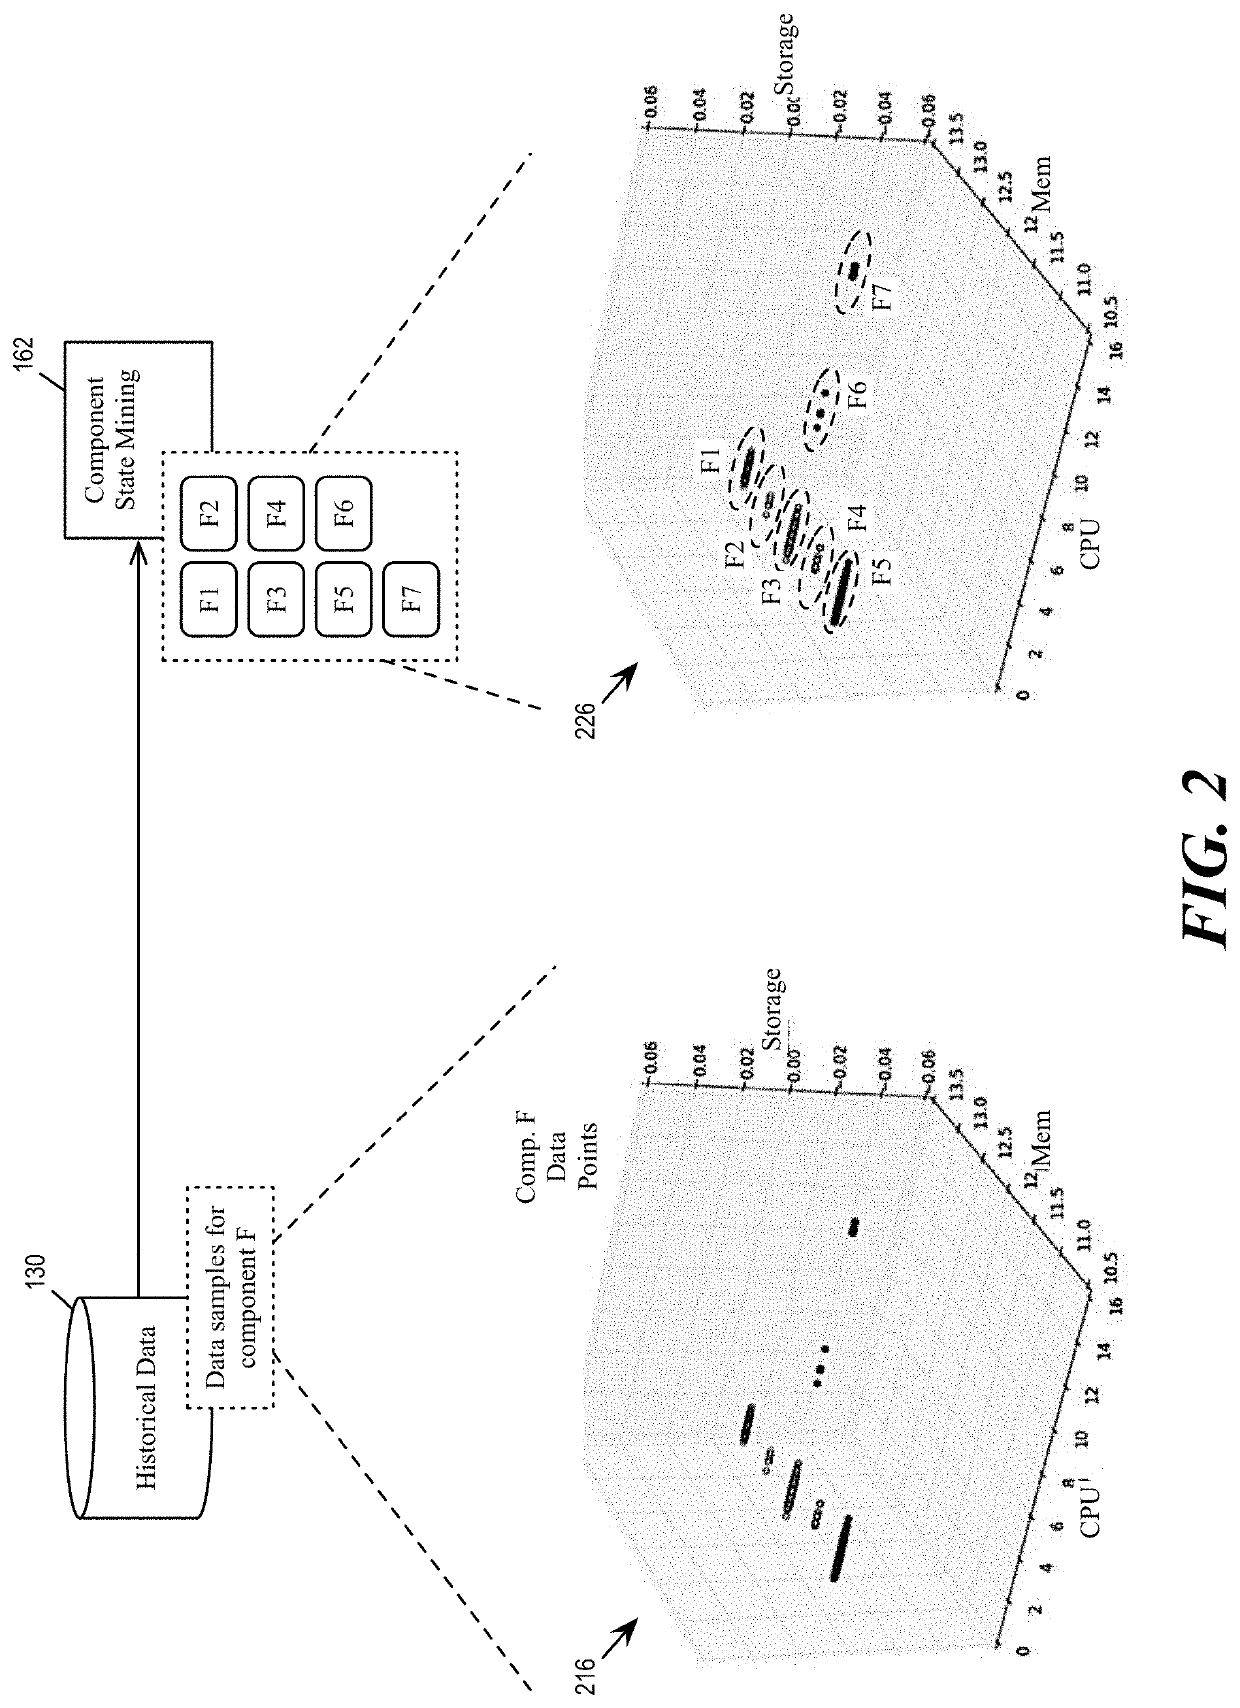 Detection of misbehaving components for large scale distributed systems